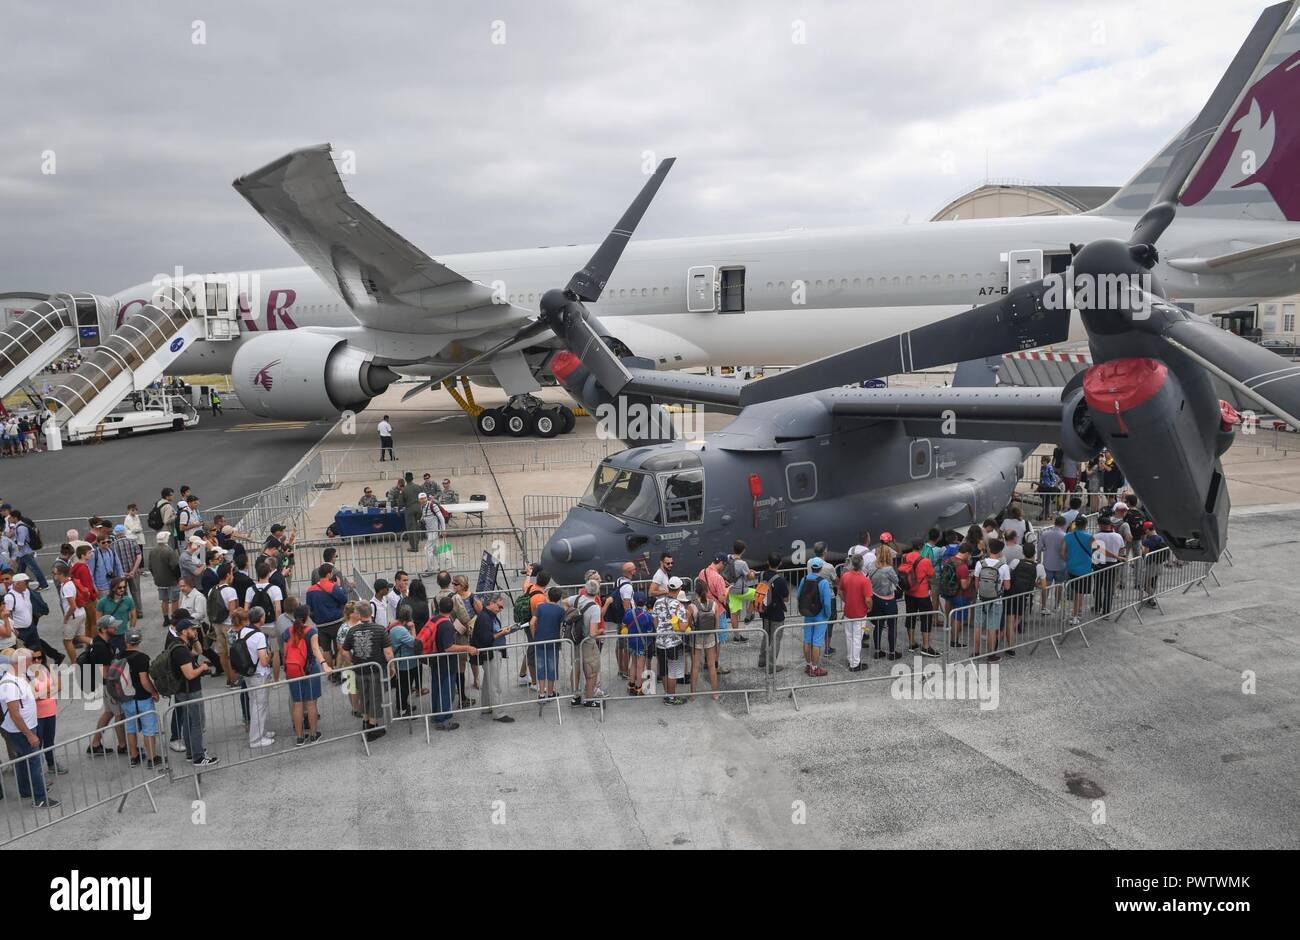 Air show attendees wait in line to tour a CV-22 Osprey from Royal Air Force Mildenhall, England, at Le Bourget Airport, France, during the Paris Air Show, June 23, 2017. The Paris Air Show offers the U.S. a unique opportunity to showcase their leadership in aerospace technology to an international audience. By participating, the U.S. hopes to promote standardization and interoperability of equipment with their NATO allies and international partners. This year marks the 52nd Paris Air Show and the event features more than 100 aircraft from around the world. Stock Photo